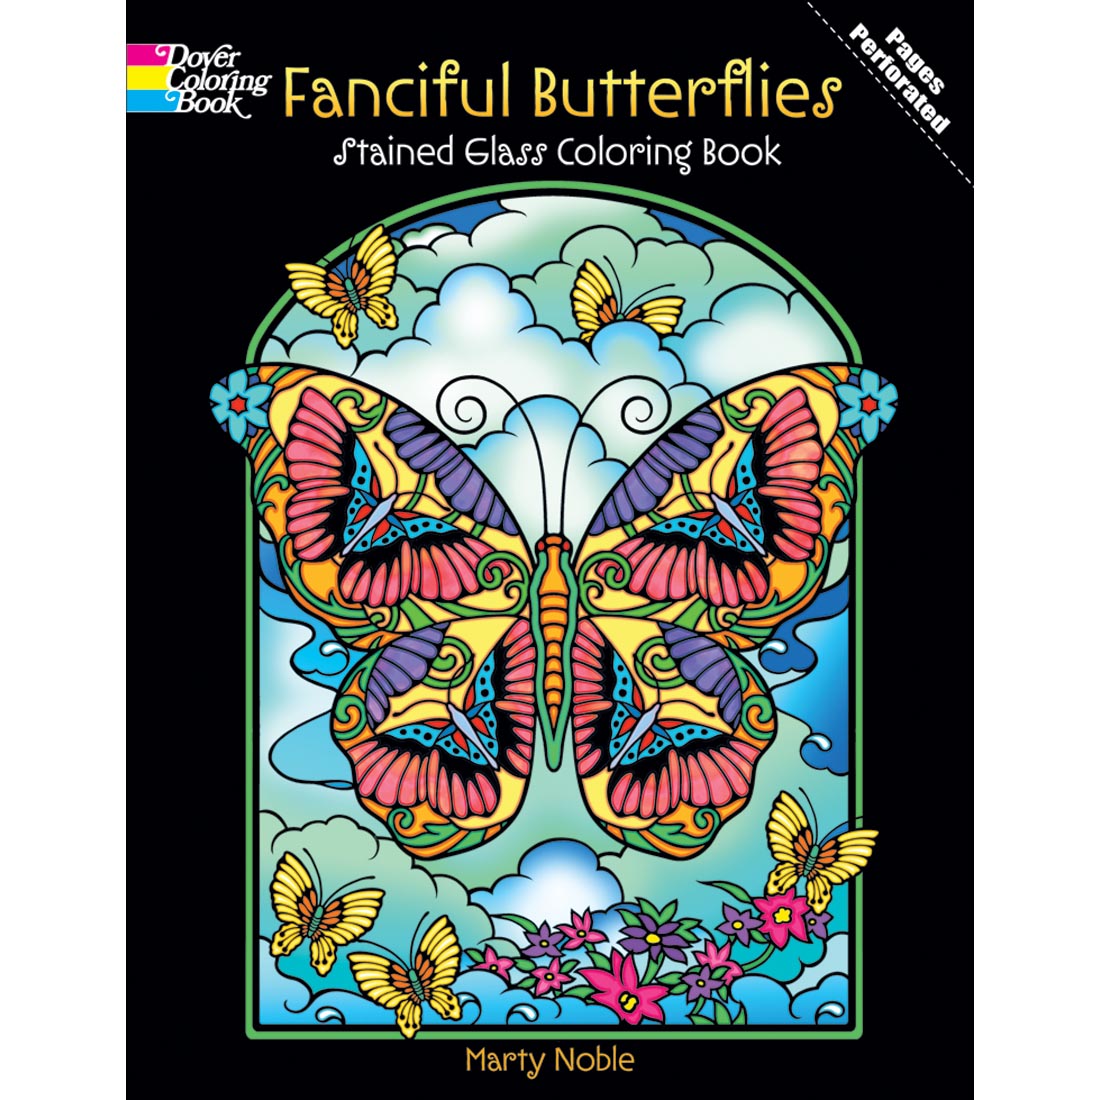 Fanciful Butterflies Stained Glass Coloring Book by Dover